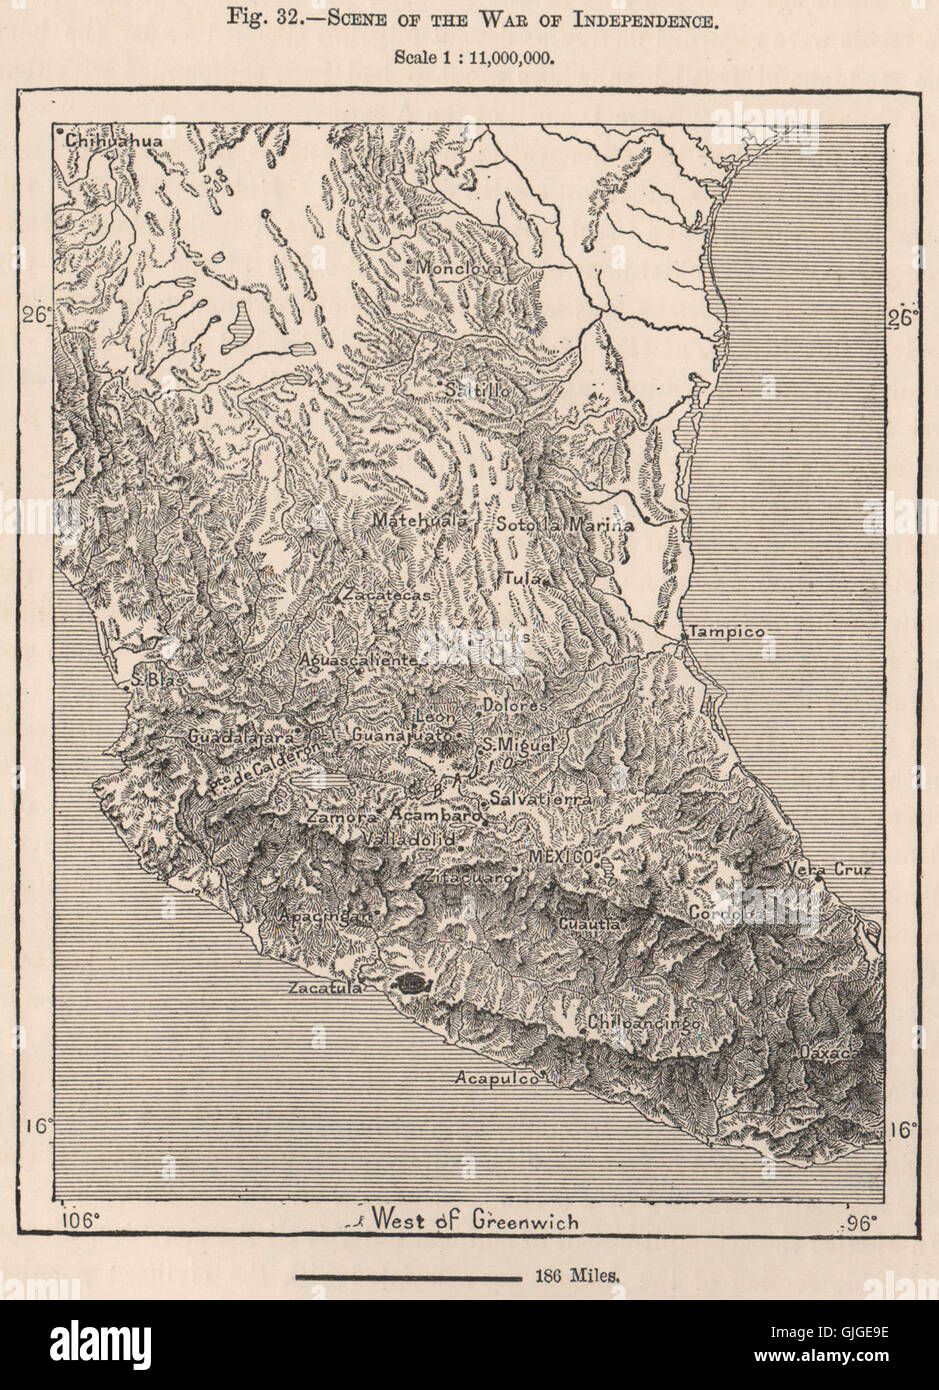 Scene of the war of independence. Mexico, 1885 antique map Stock Photo